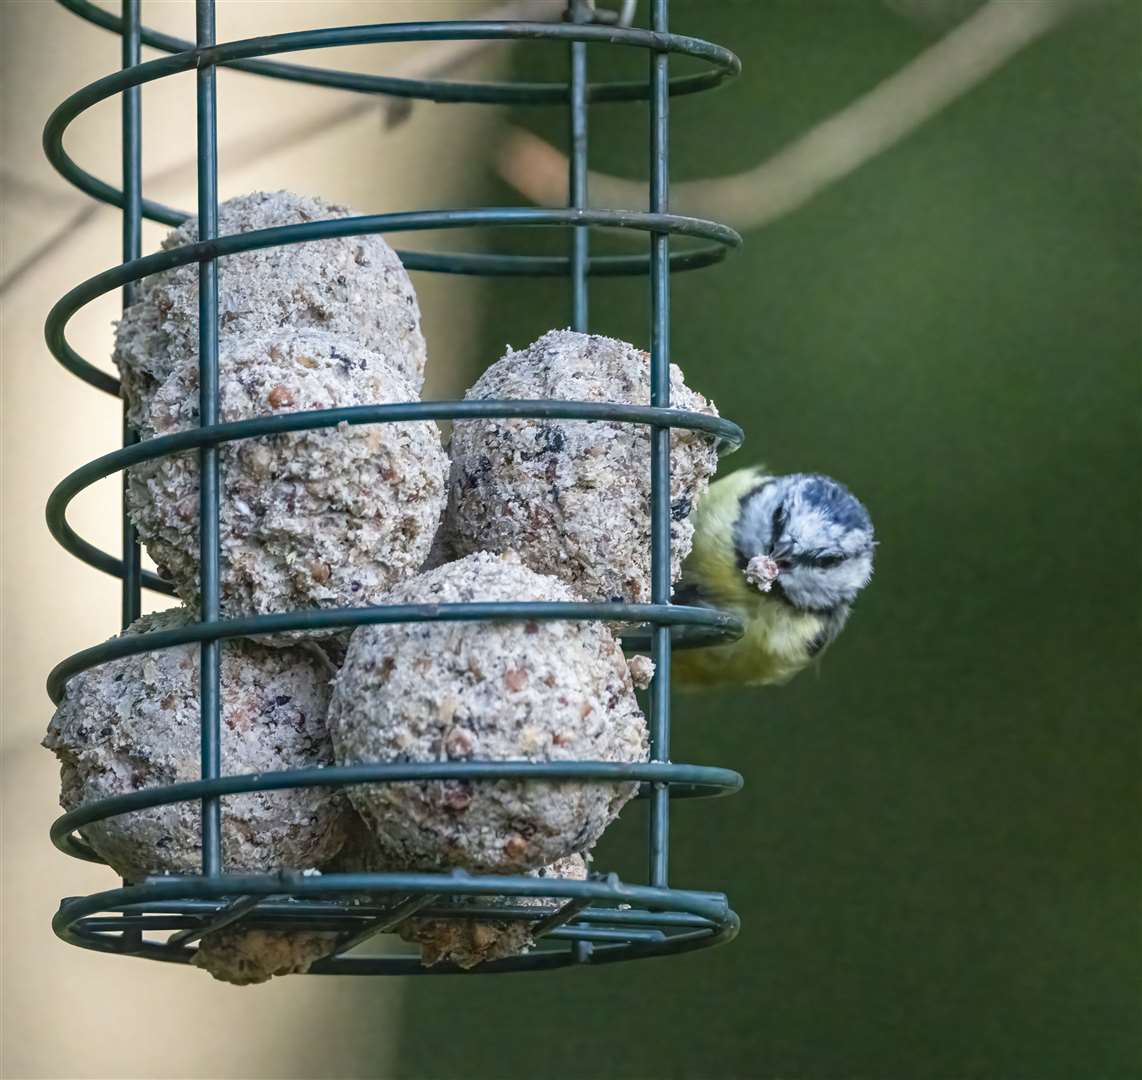 Bird feeders can spread disease if not cleaned properly. Image: iStock.